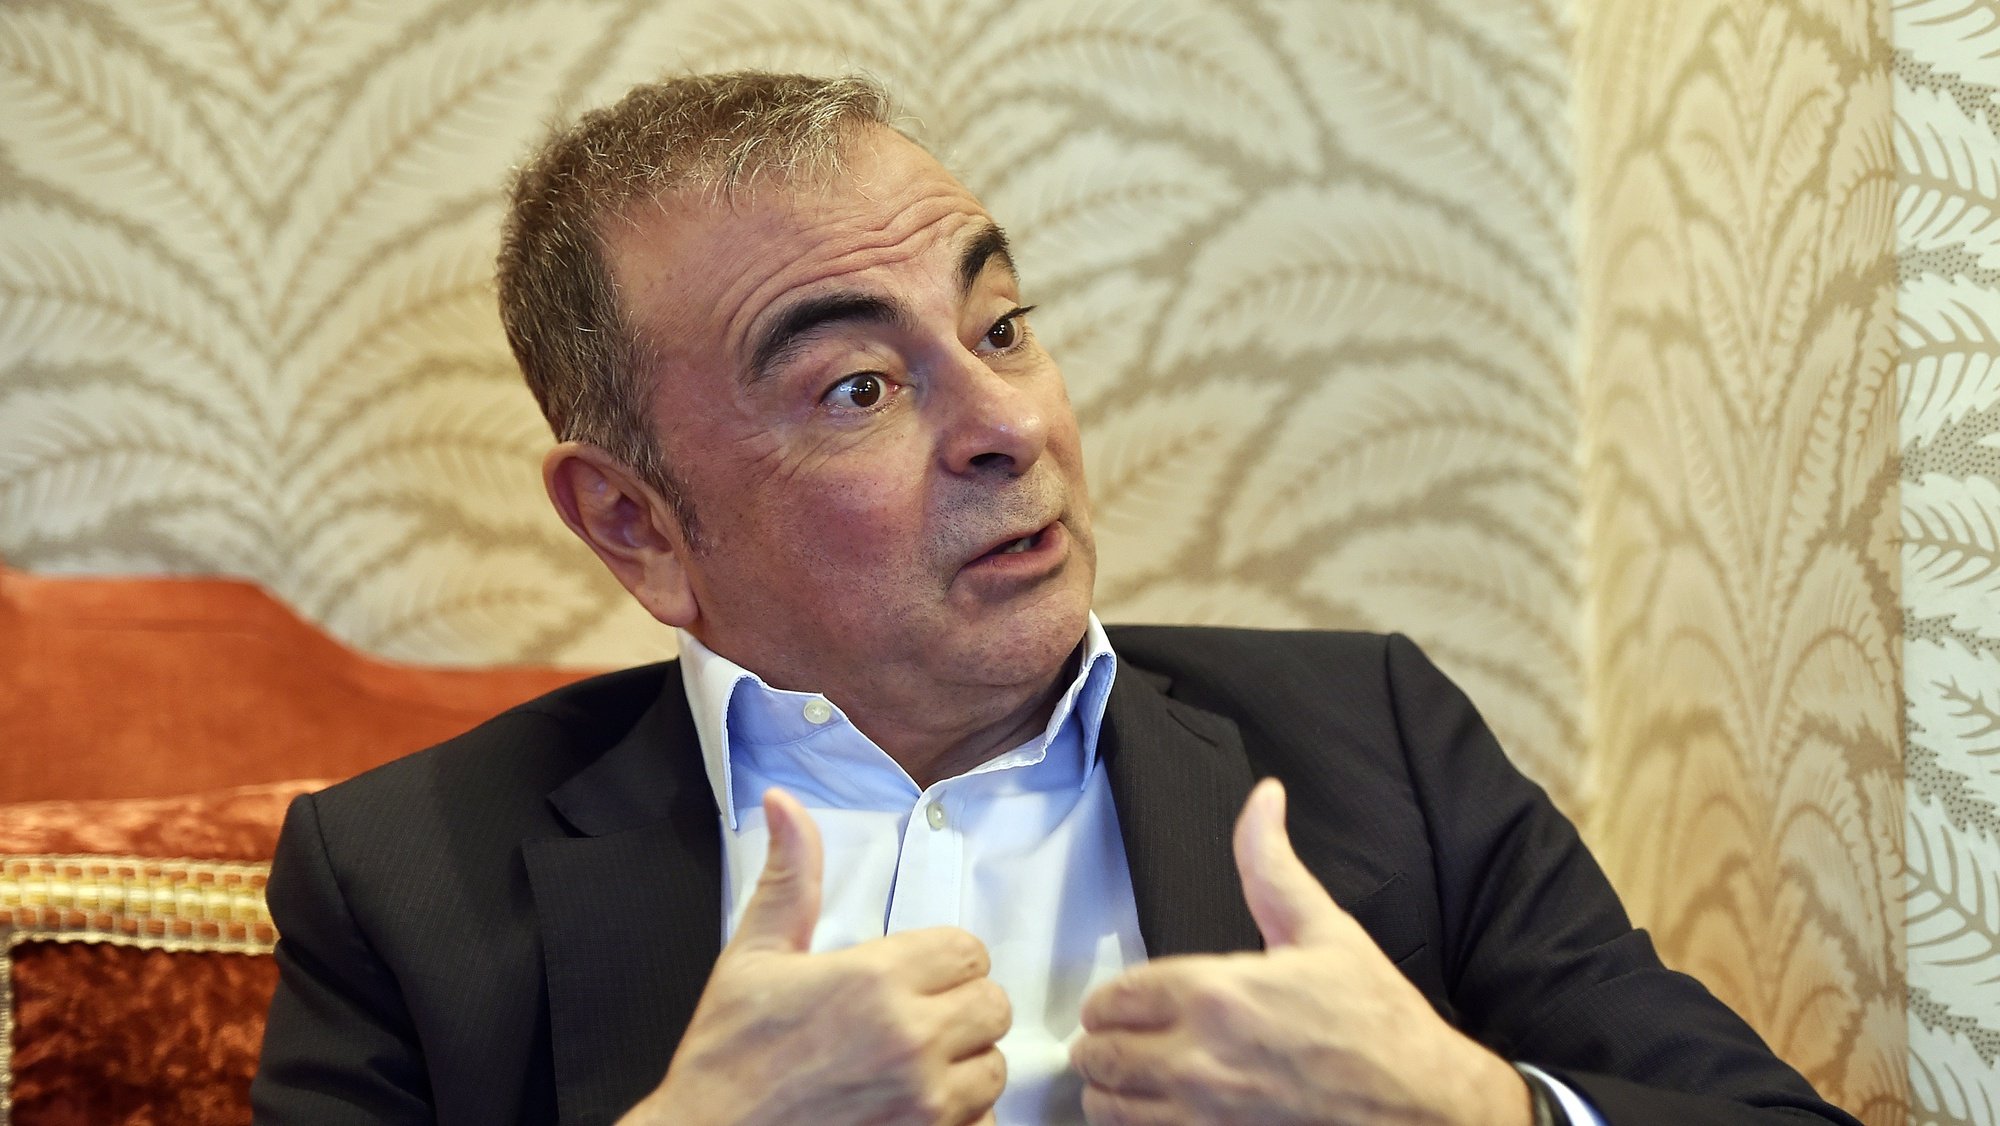 epa08891505 Lebanese-French businessman Carlos Ghosn speaks during an interview in Beirut, Lebanon, 16 December 2020 (issued 18 December 2020). Former Nissan chairman Carlos Ghosn on 29 December 2019 fled from Japan where he was on bail and under surveillance in Tokyo awaiting trial on financial misconduct charges.  EPA/WAEL HAMZEH